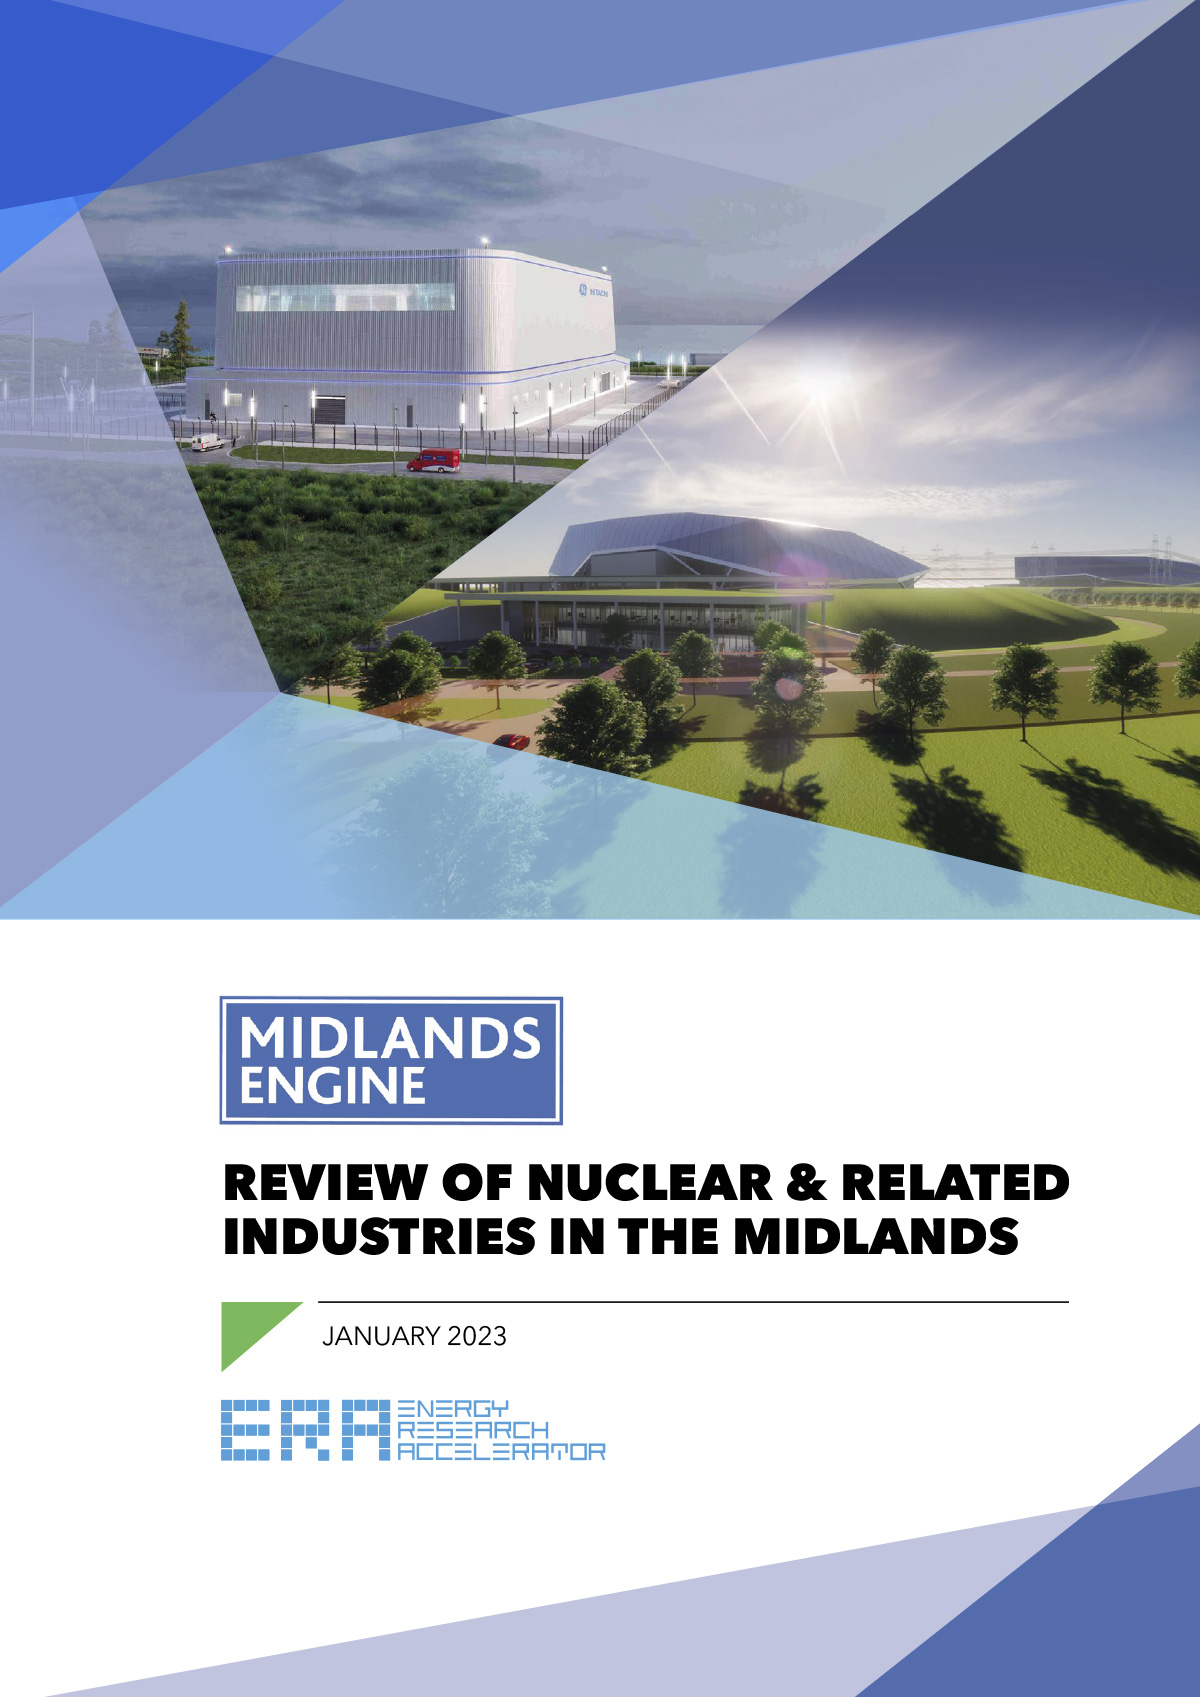 Midlands nuclear report - thumbnail image of cover